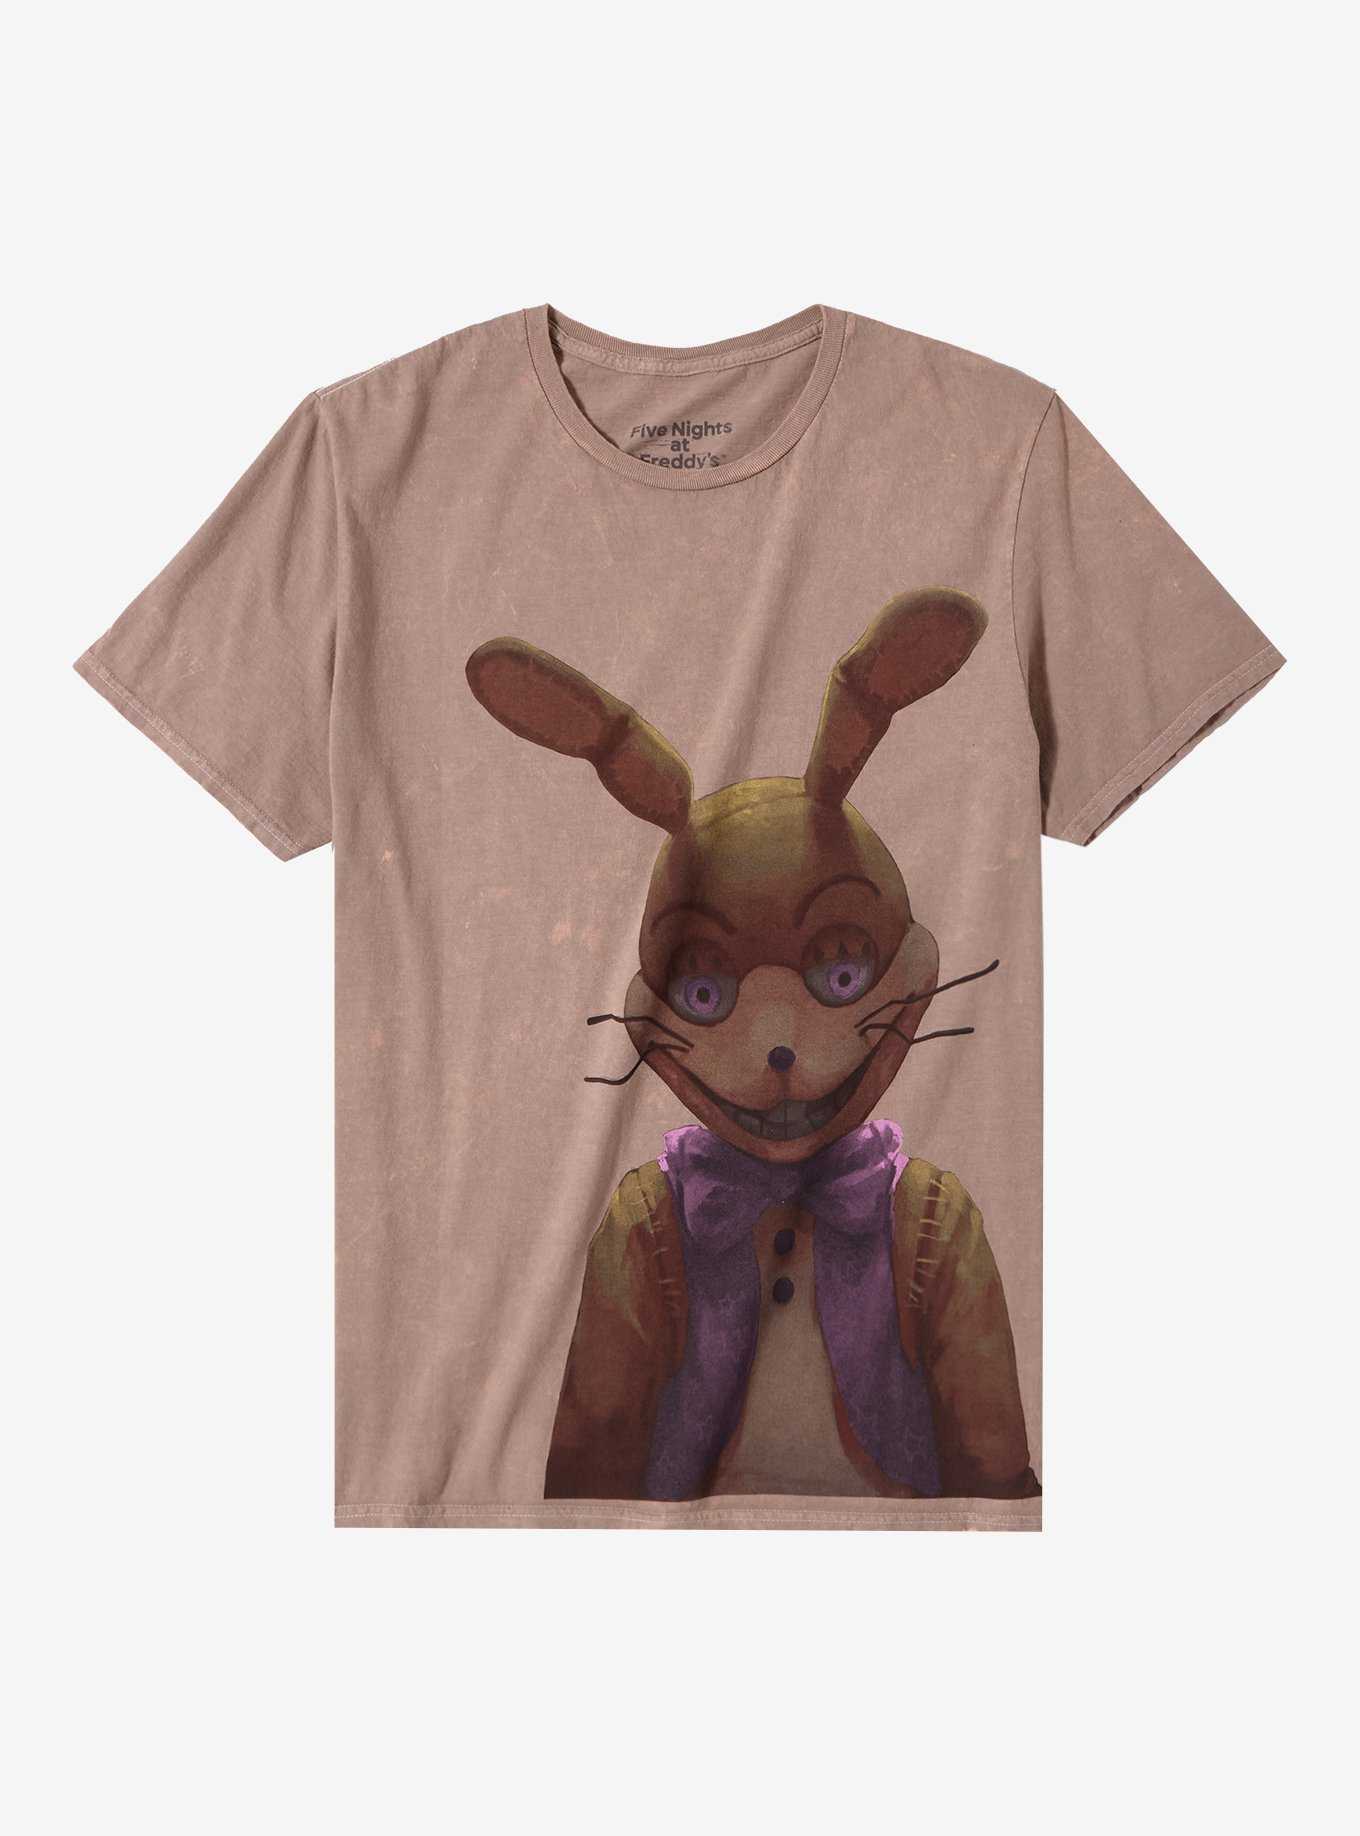 Five Nights At Freddy's Bonnie The Bunny Girls T-Shirt